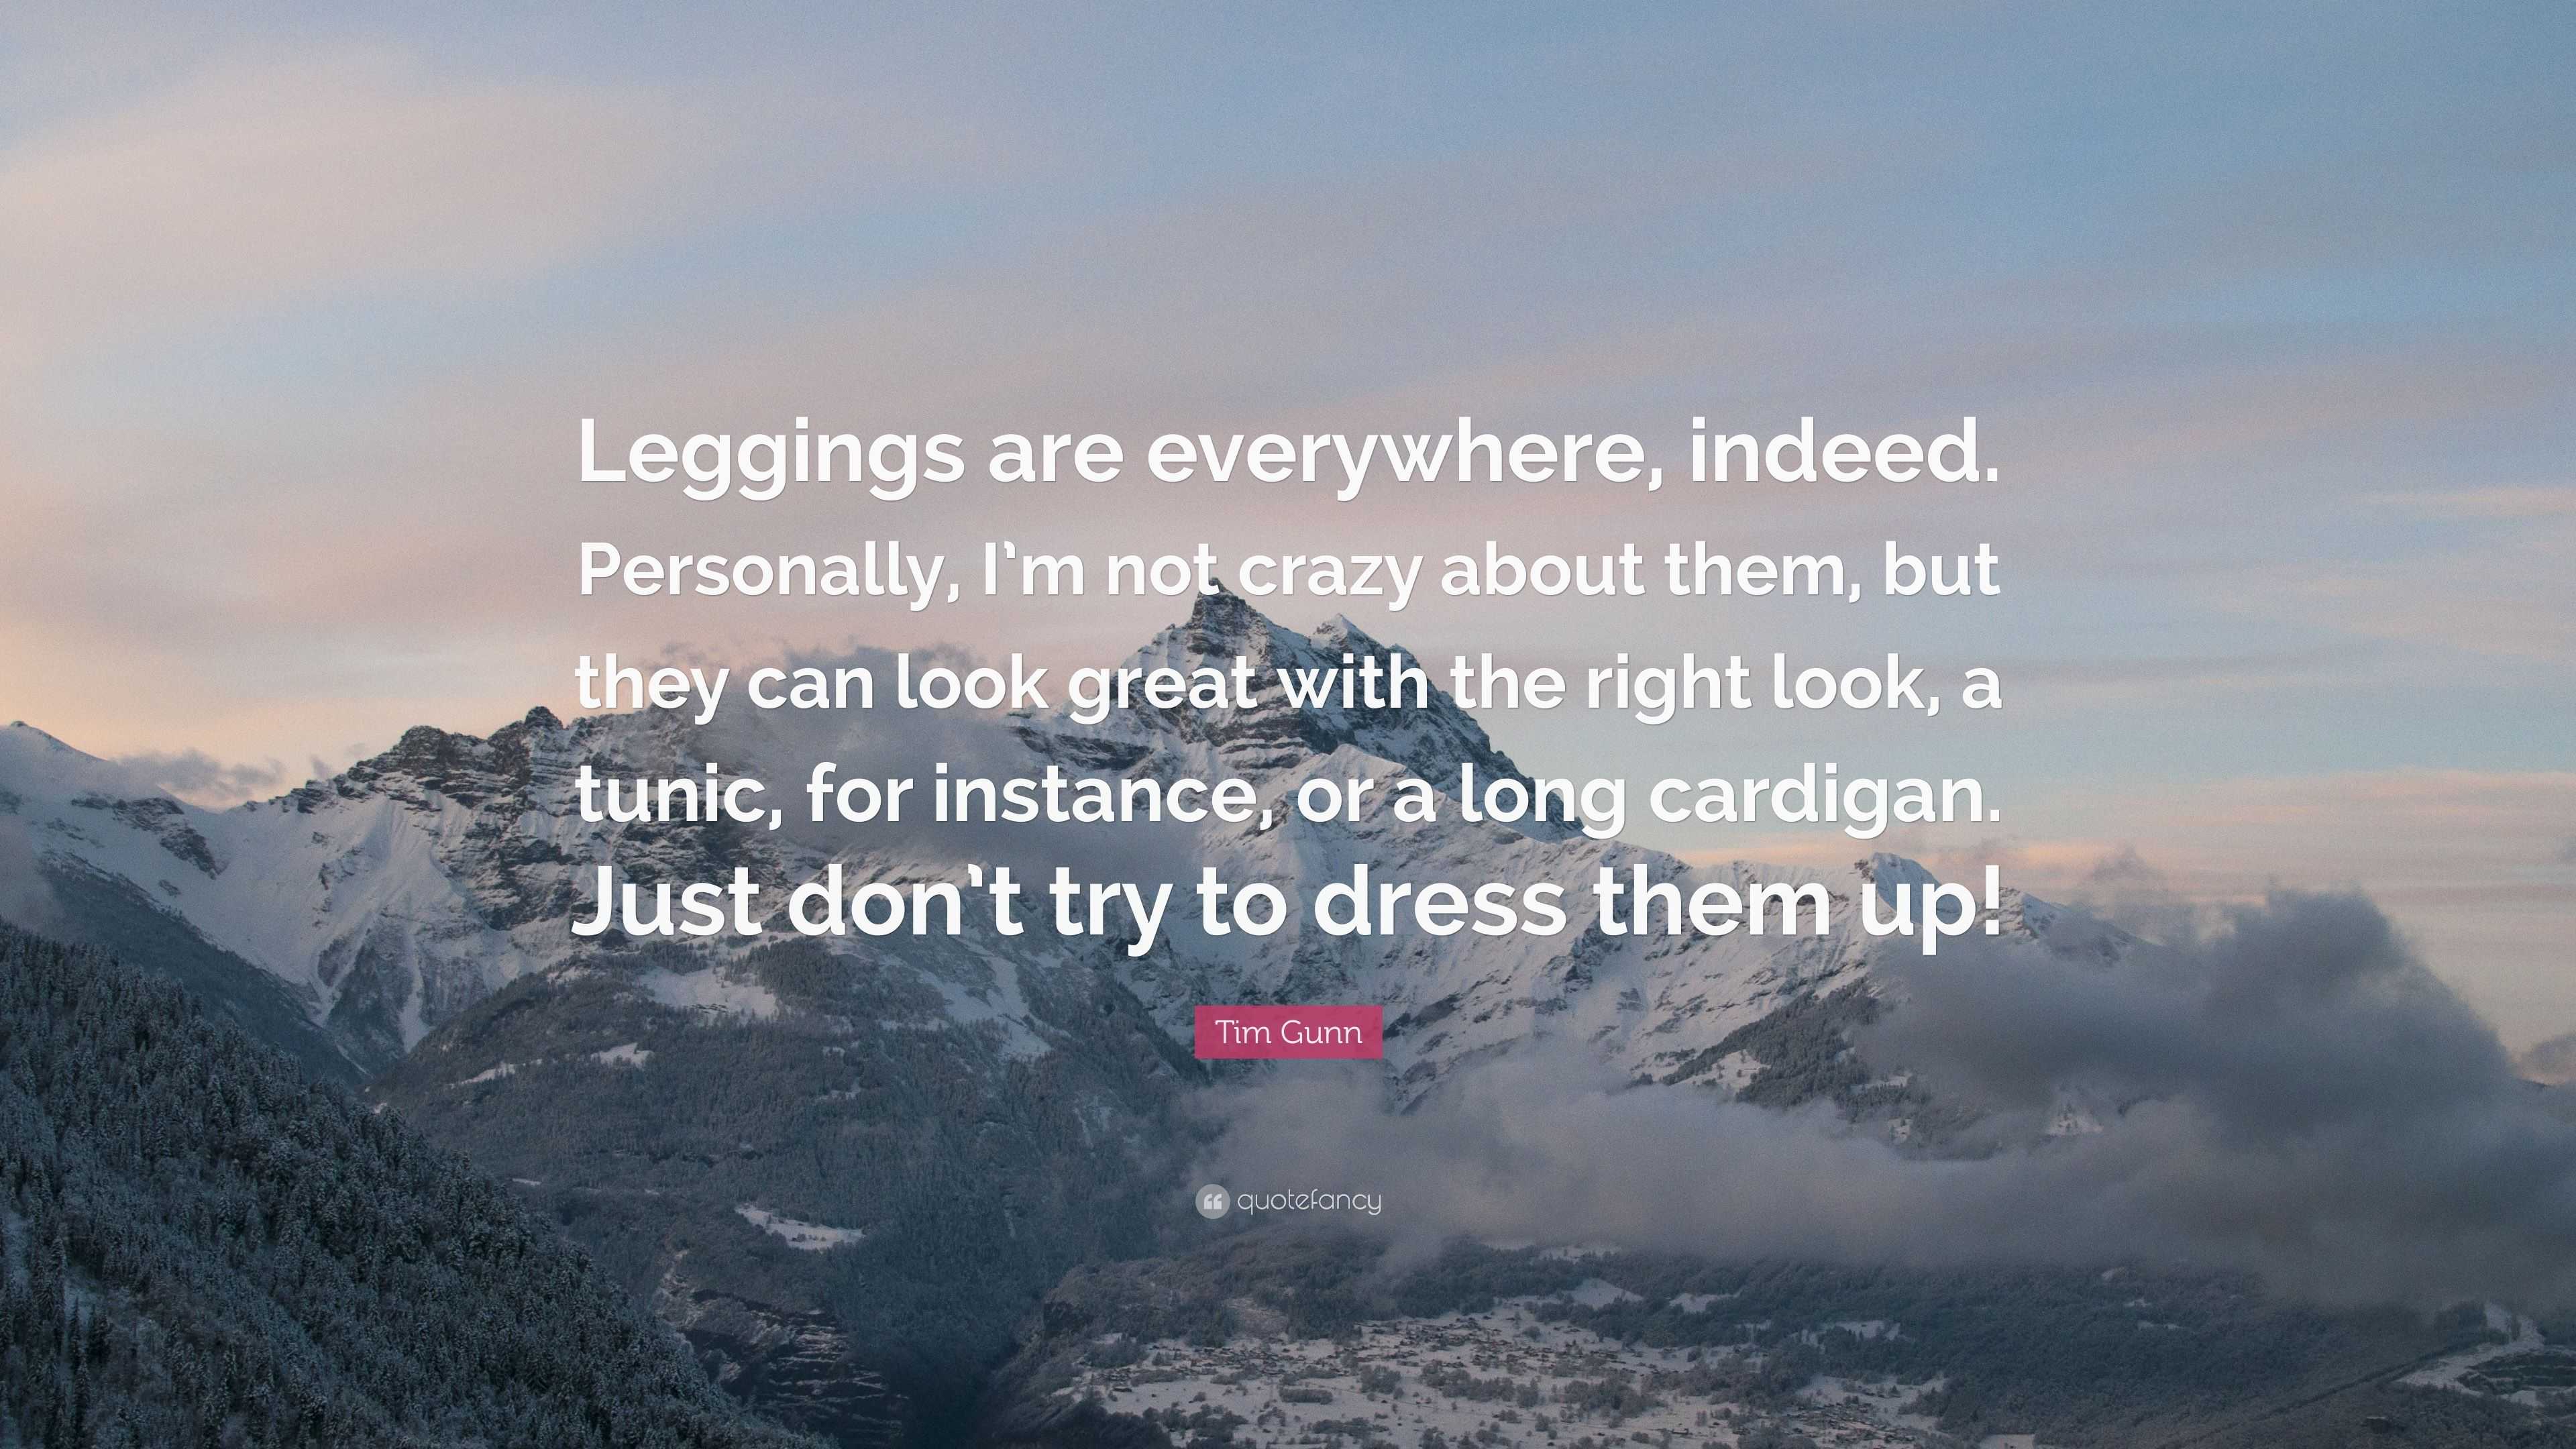 Tim Gunn Quote: “Leggings are everywhere, indeed. Personally, I'm not crazy  about them, but they can look great with the right look, a tu”